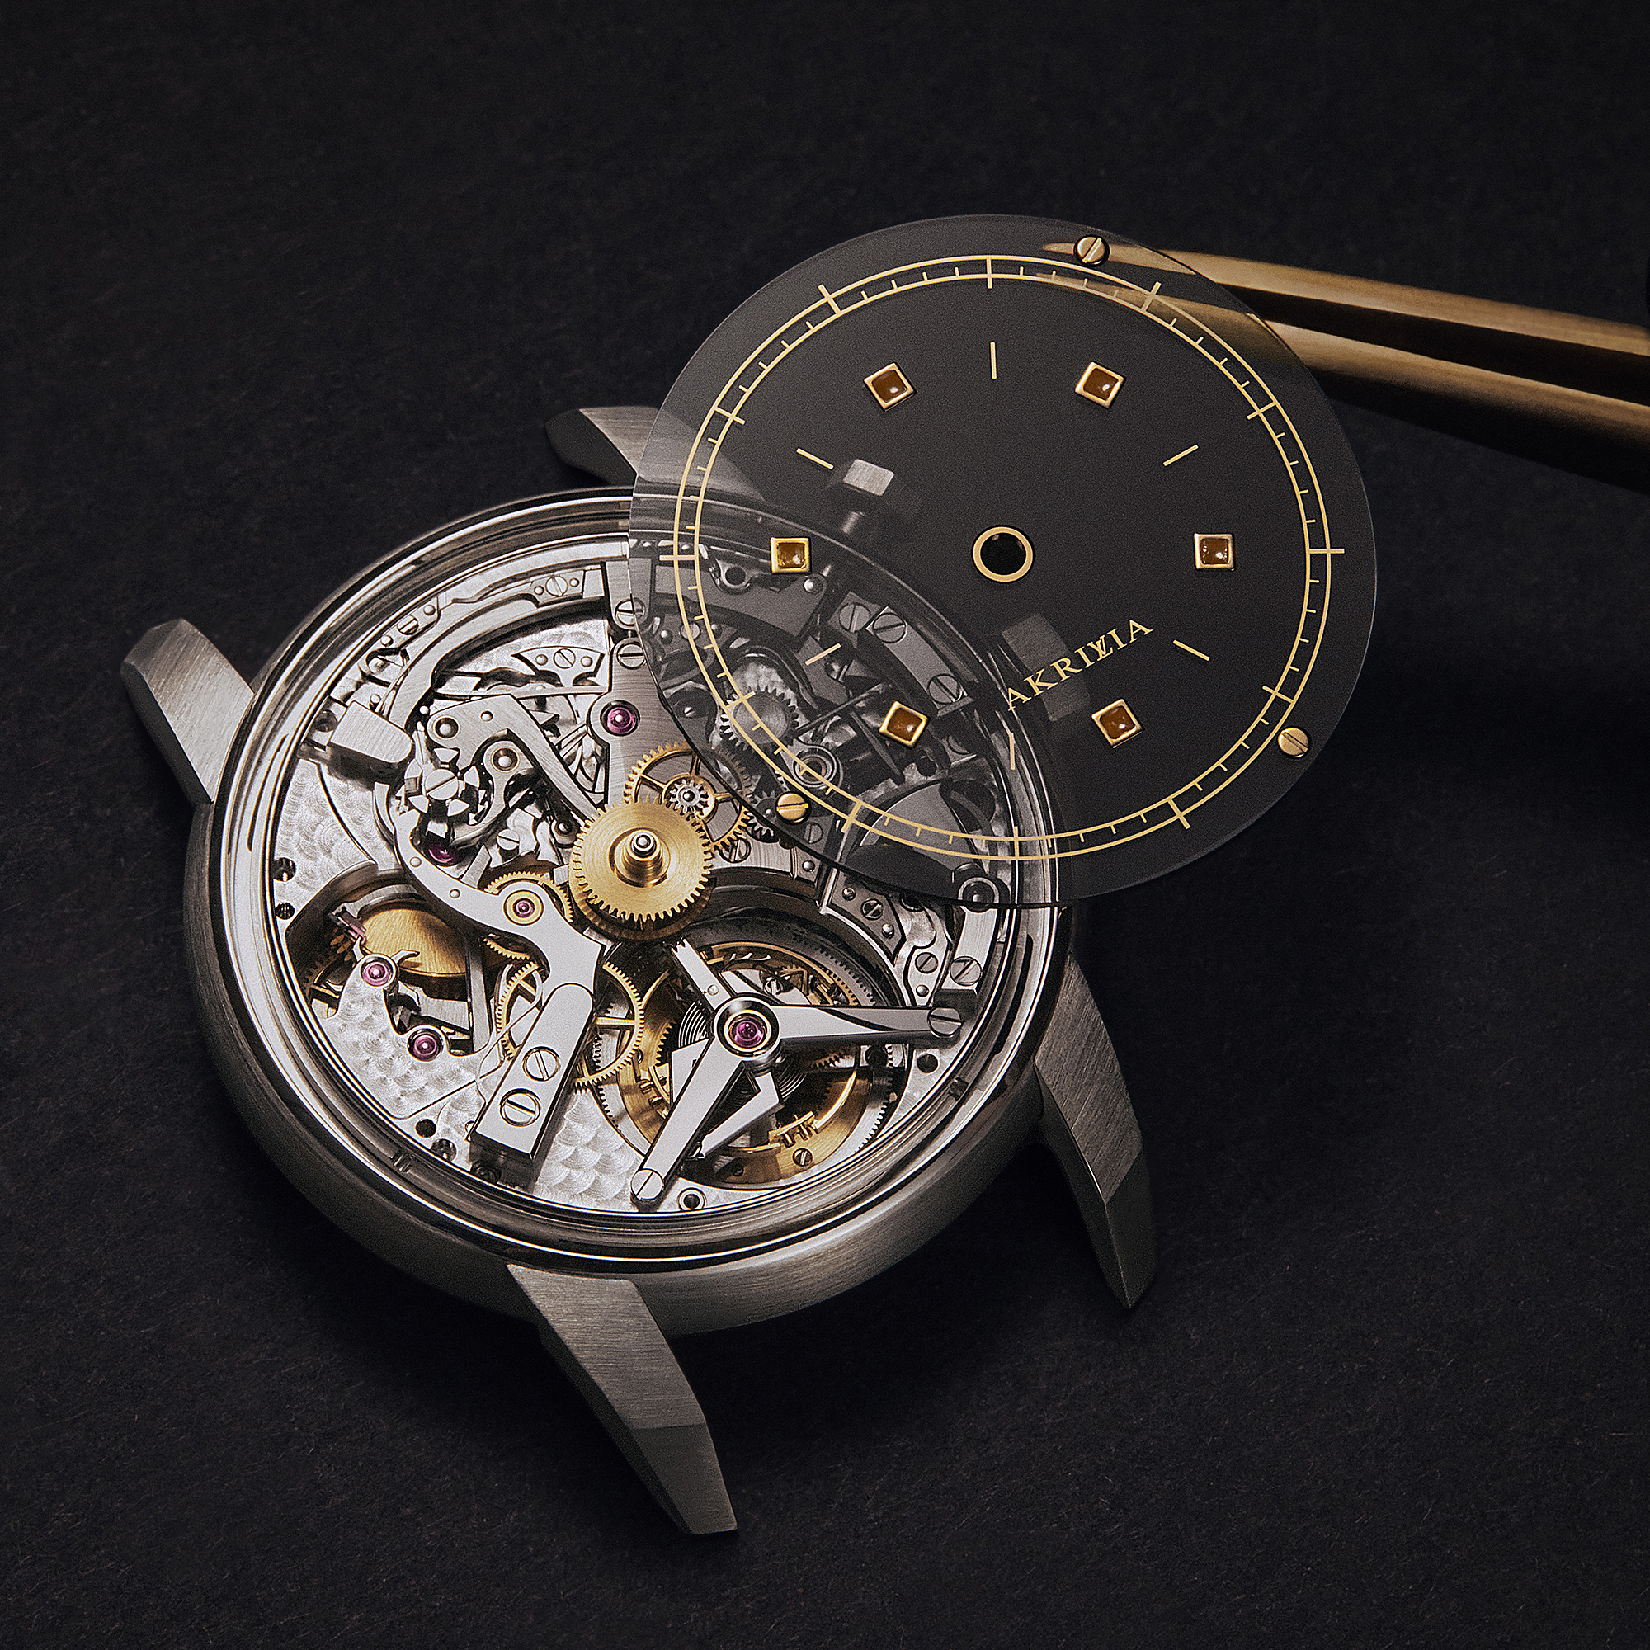 The tinted dial reveals the magnificent architecture and decoration on the wrist at all times. 